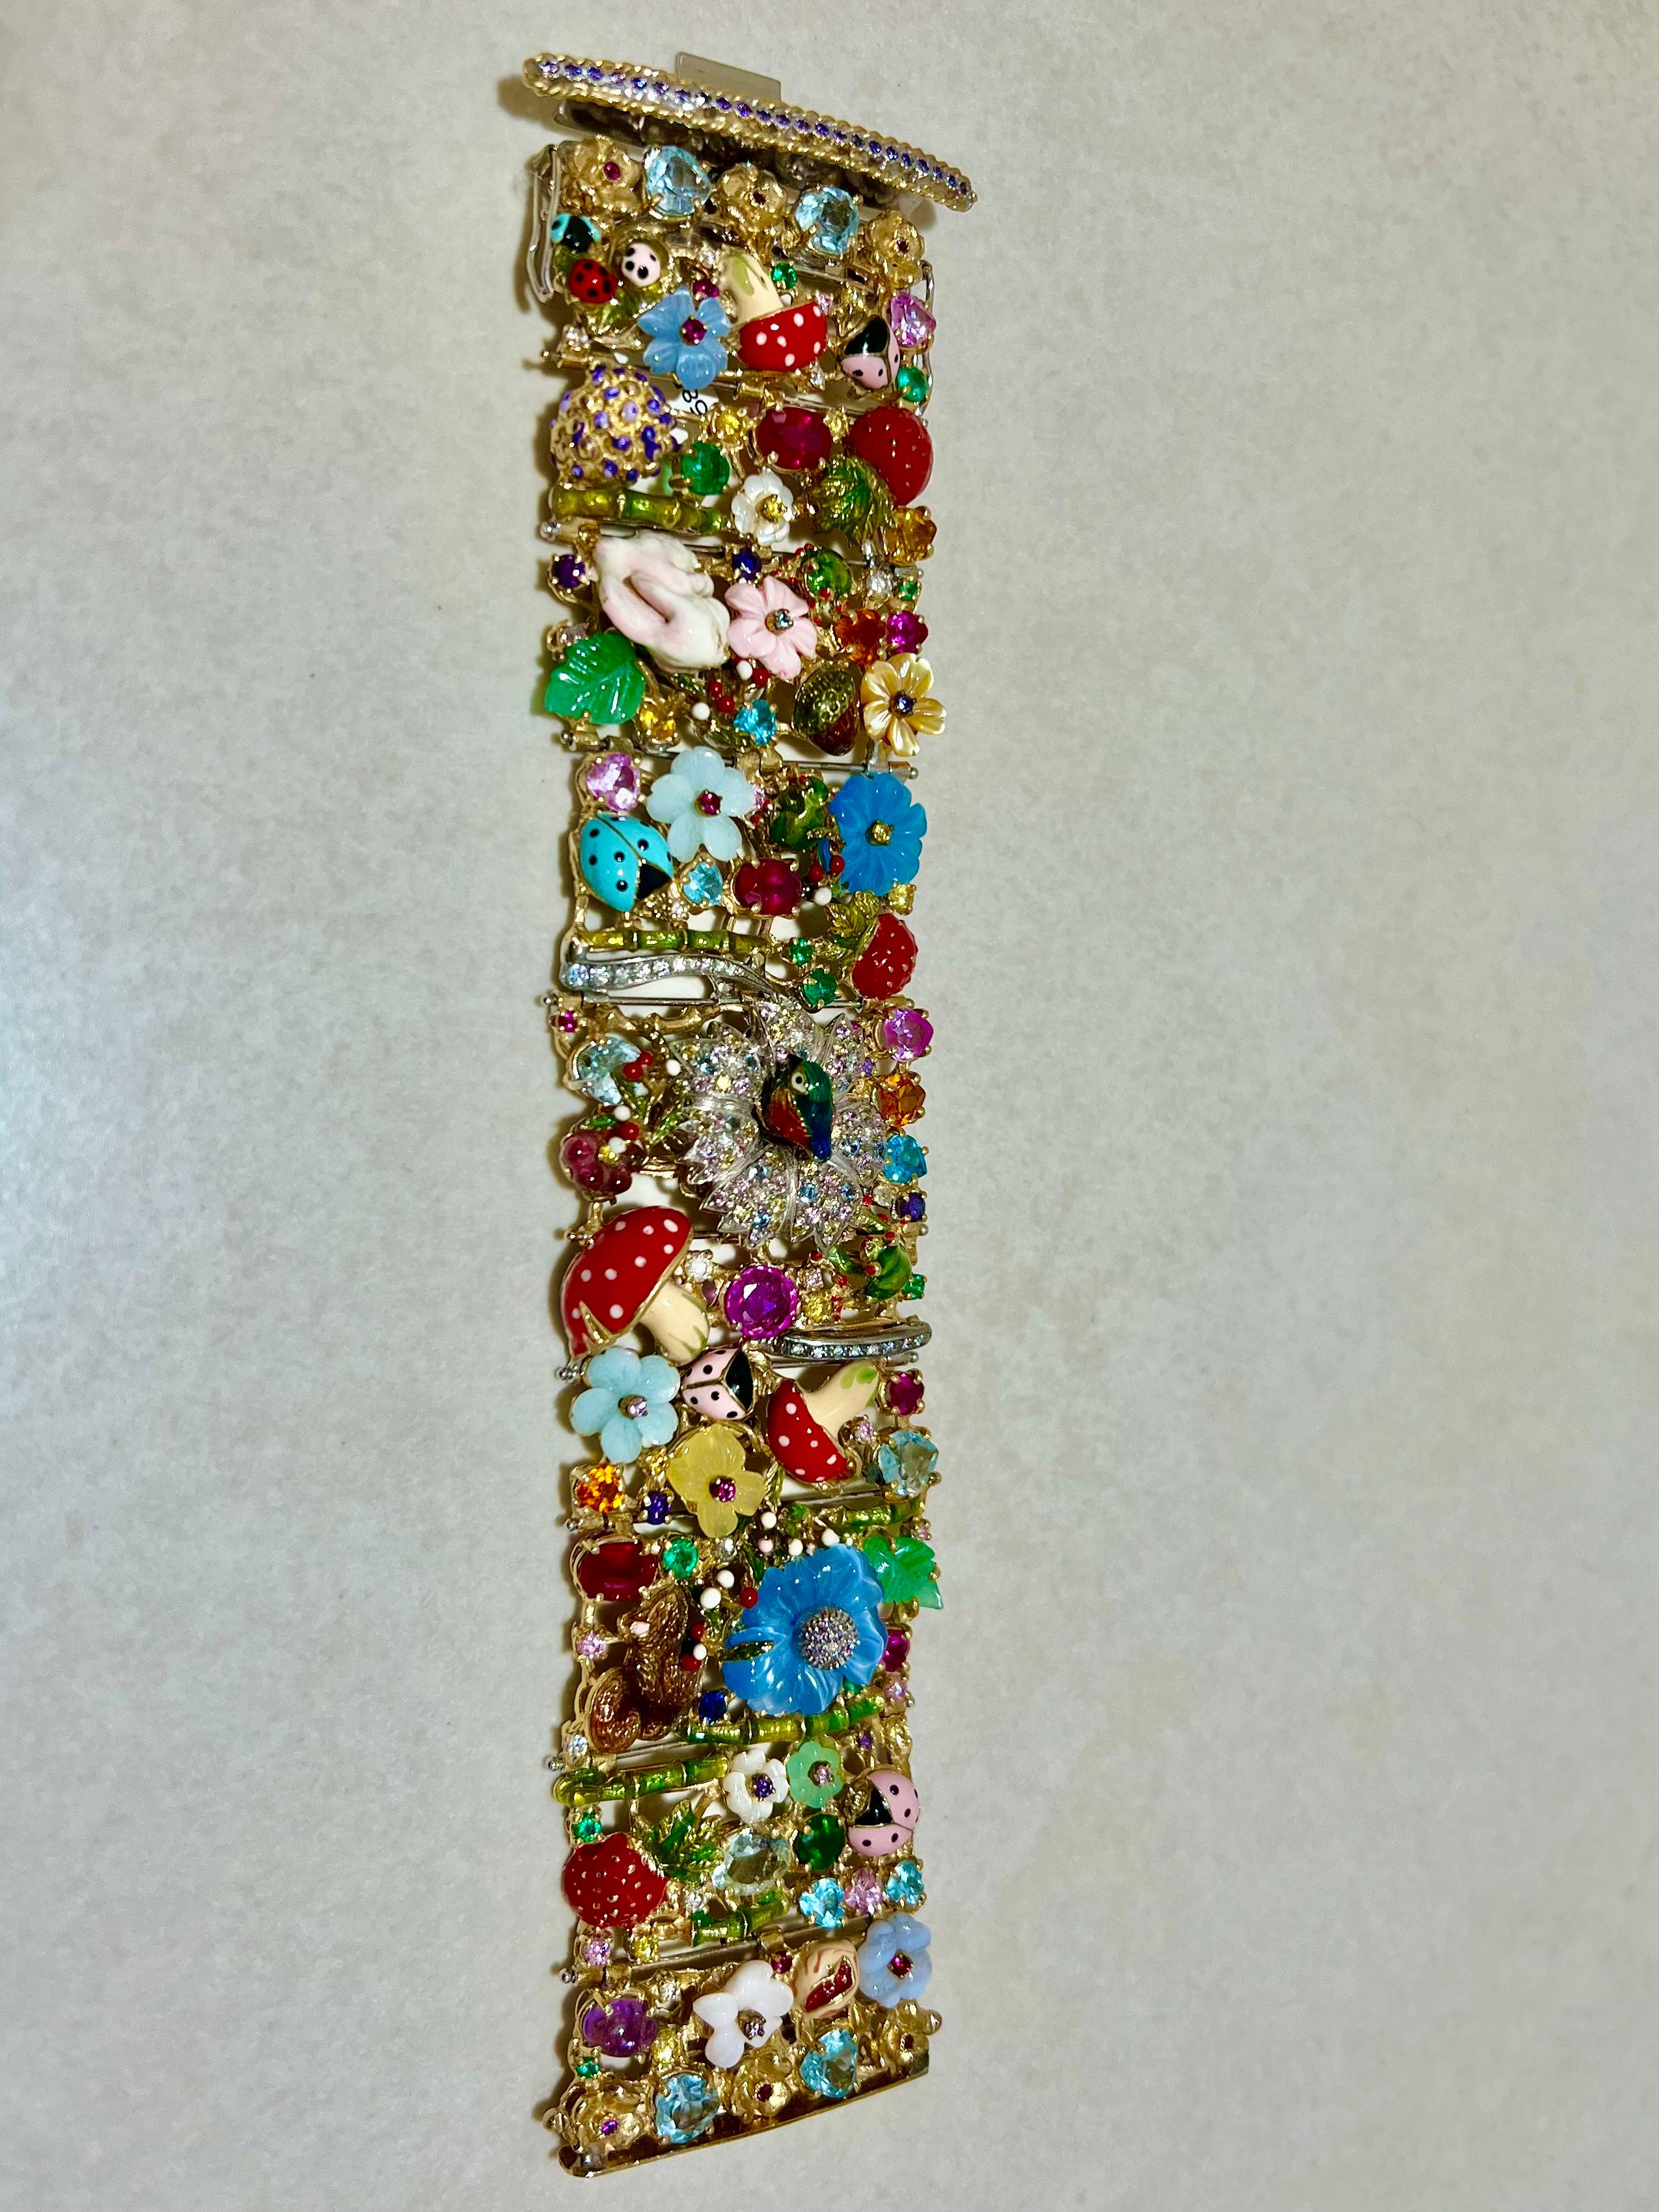 Bracelet Paradiso in 18kt  yellow gold with enamel, diamonds and different color stones (ruby, sapphire, emerald, tourmaline), one of a unique piece from the Italien designer Santagostino.
